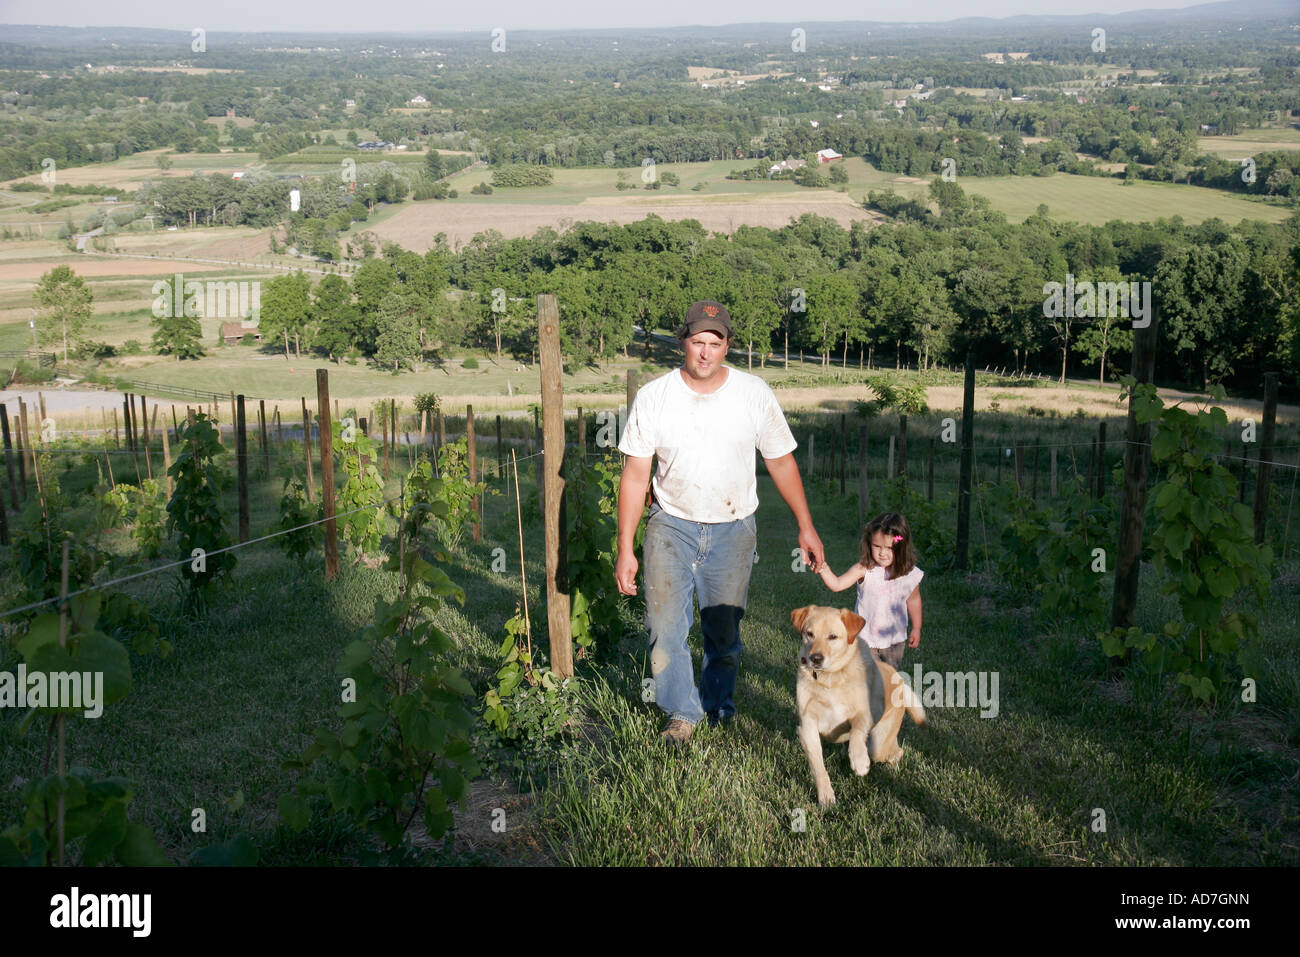 Virginia Loudoun County,Bluemont,Bluemont Vineyards,vineyard,wine,vineyard worker,workers,girl girls,youngster youngsters youth youths female kid kids Stock Photo